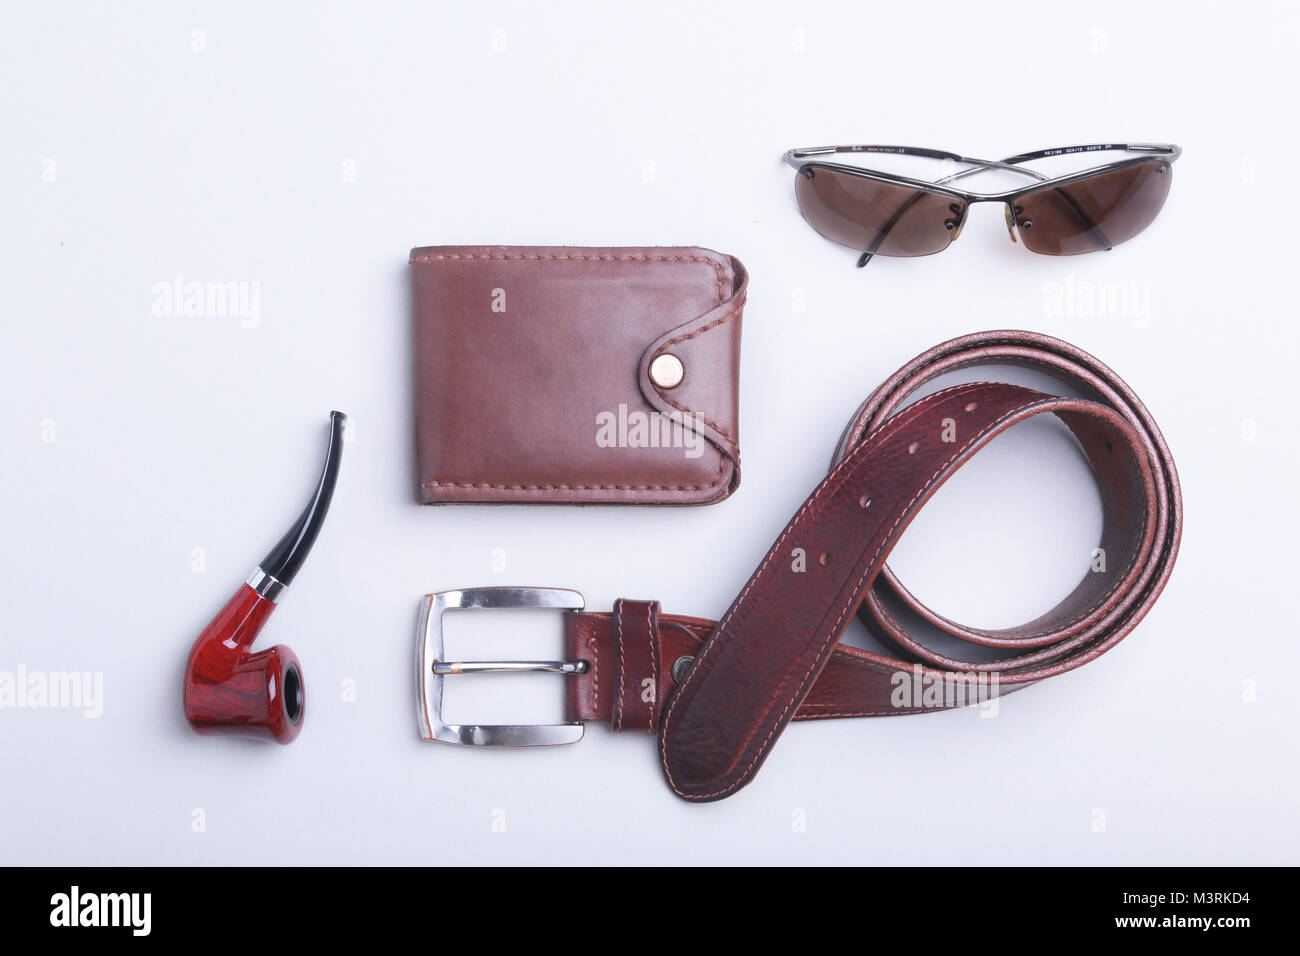 Men's accessories for business and rekreation. A professional studio photograph of men's business accessories. Top view composition Stock Photo